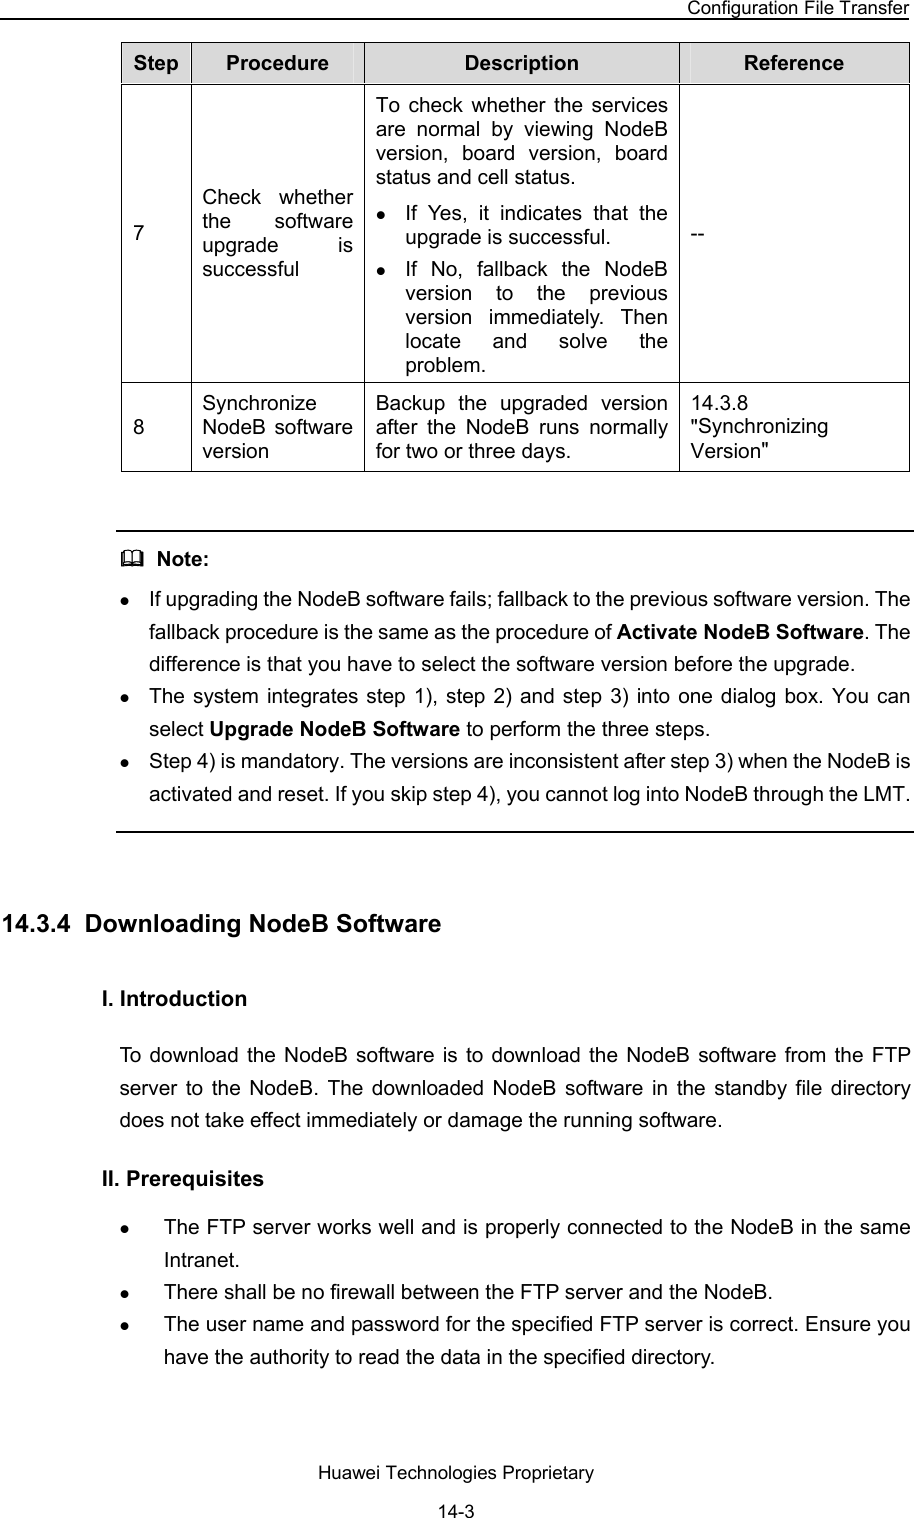 NodeB LMT User Guide Chapter 14  NodeB Software Update and Data Configuration File Transfer Huawei Technologies Proprietary 14-3 Step   Procedure  Description  Reference  7 Check whether the software upgrade is successful To check whether the services are normal by viewing NodeB version, board version, board status and cell status. z If Yes, it indicates that the upgrade is successful. z If No, fallback the NodeB version to the previous version immediately. Then locate and solve the problem.  -- 8 Synchronize NodeB software version  Backup the upgraded version after the NodeB runs normally for two or three days. 14.3.8   &quot;Synchronizing Version&quot;    Note:  z If upgrading the NodeB software fails; fallback to the previous software version. The fallback procedure is the same as the procedure of Activate NodeB Software. The difference is that you have to select the software version before the upgrade. z The system integrates step 1), step 2) and step 3) into one dialog box. You can select Upgrade NodeB Software to perform the three steps. z Step 4) is mandatory. The versions are inconsistent after step 3) when the NodeB is activated and reset. If you skip step 4), you cannot log into NodeB through the LMT.  14.3.4  Downloading NodeB Software I. Introduction To download the NodeB software is to download the NodeB software from the FTP server to the NodeB. The downloaded NodeB software in the standby file directory does not take effect immediately or damage the running software.  II. Prerequisites z The FTP server works well and is properly connected to the NodeB in the same Intranet.  z There shall be no firewall between the FTP server and the NodeB.  z The user name and password for the specified FTP server is correct. Ensure you have the authority to read the data in the specified directory.  